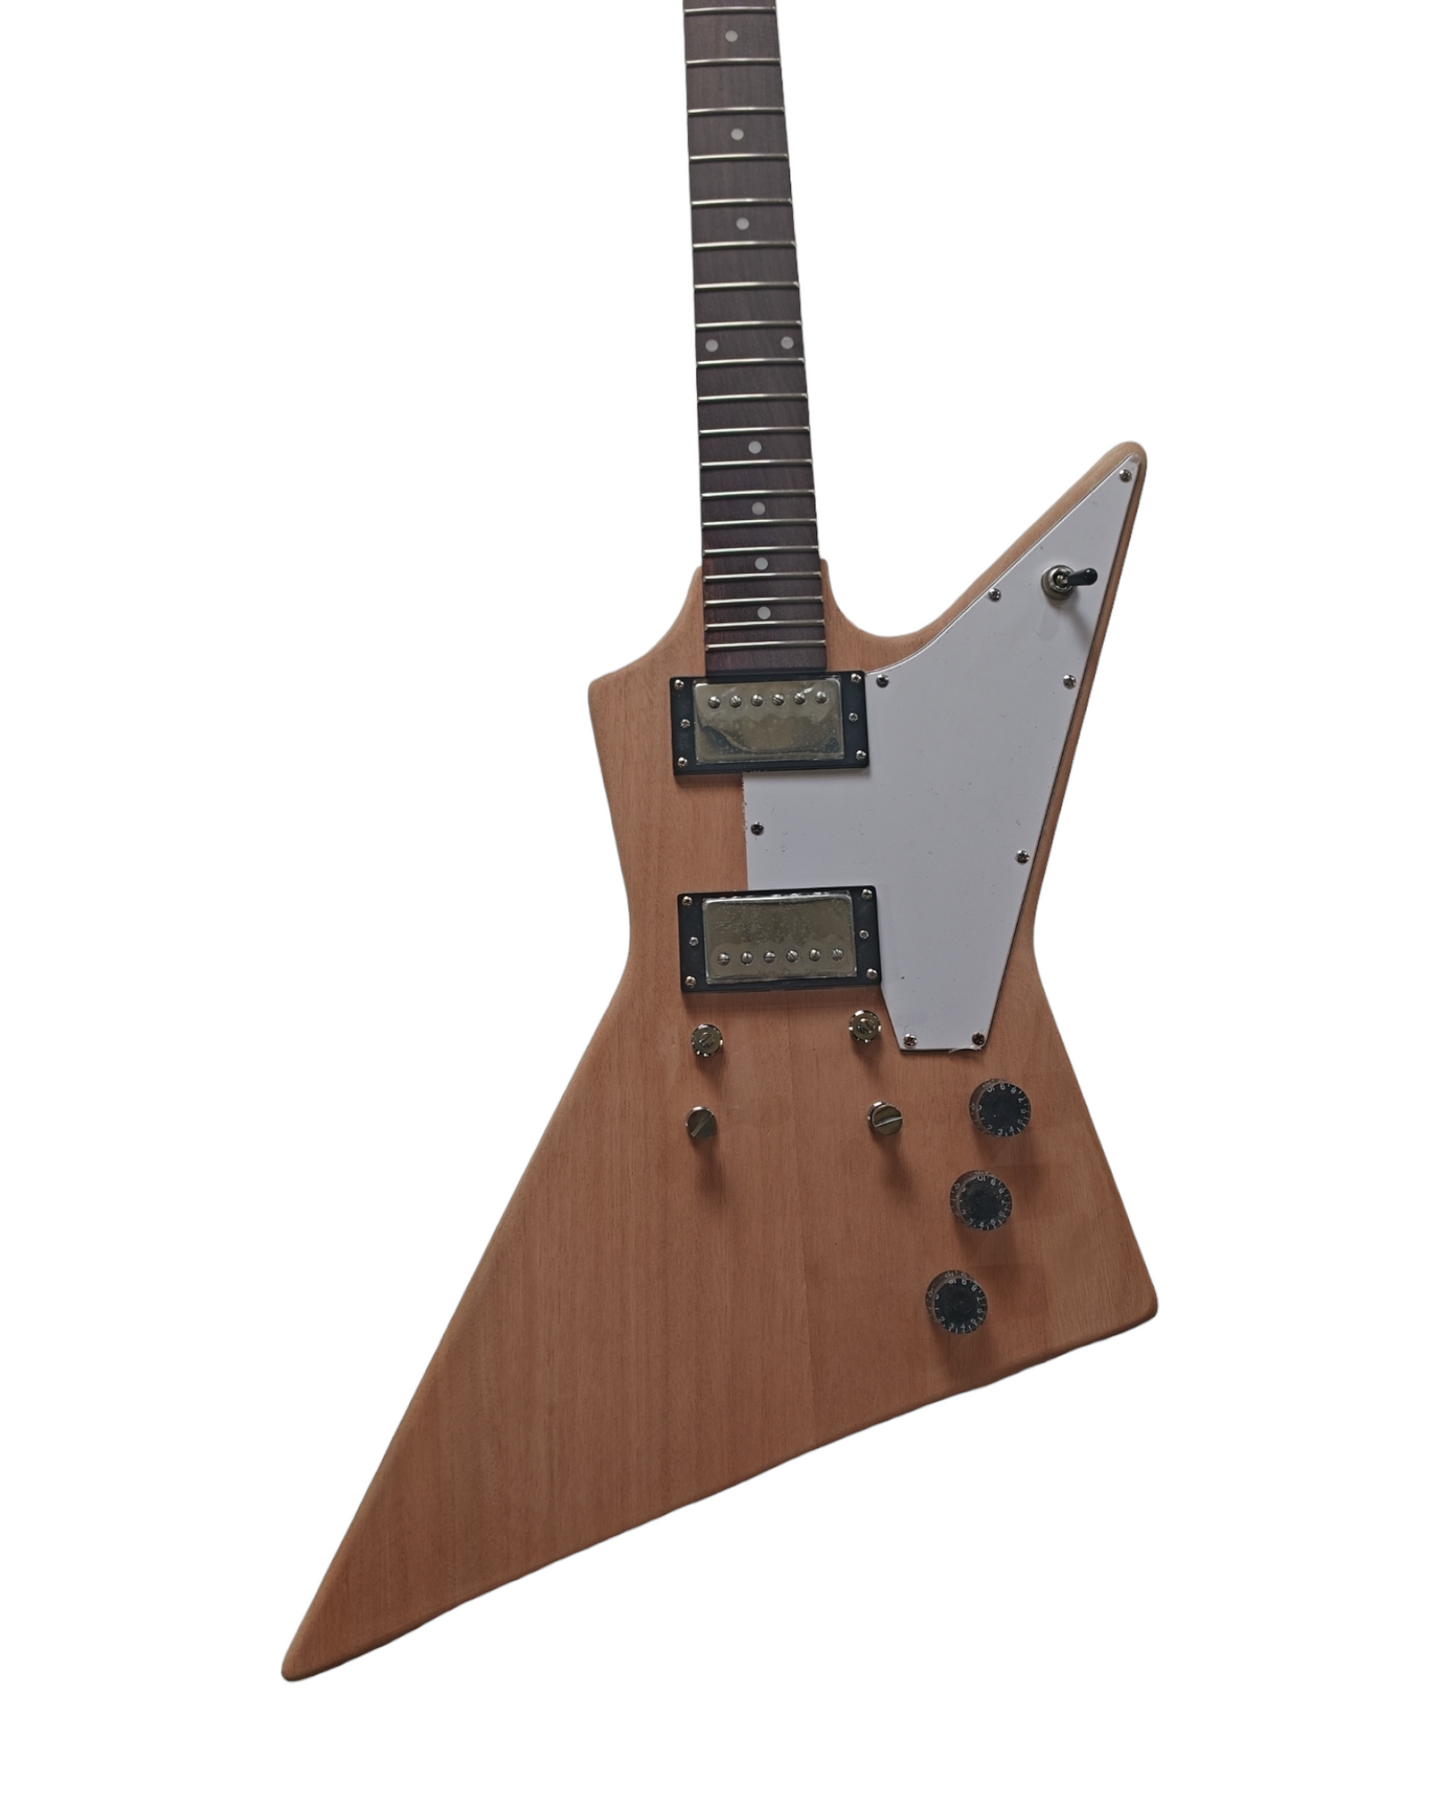 DIY DKE1958A Electric Guitar DIY Kit, Complete No-Soldering, Mahogany Body. have one black and one white pickguards